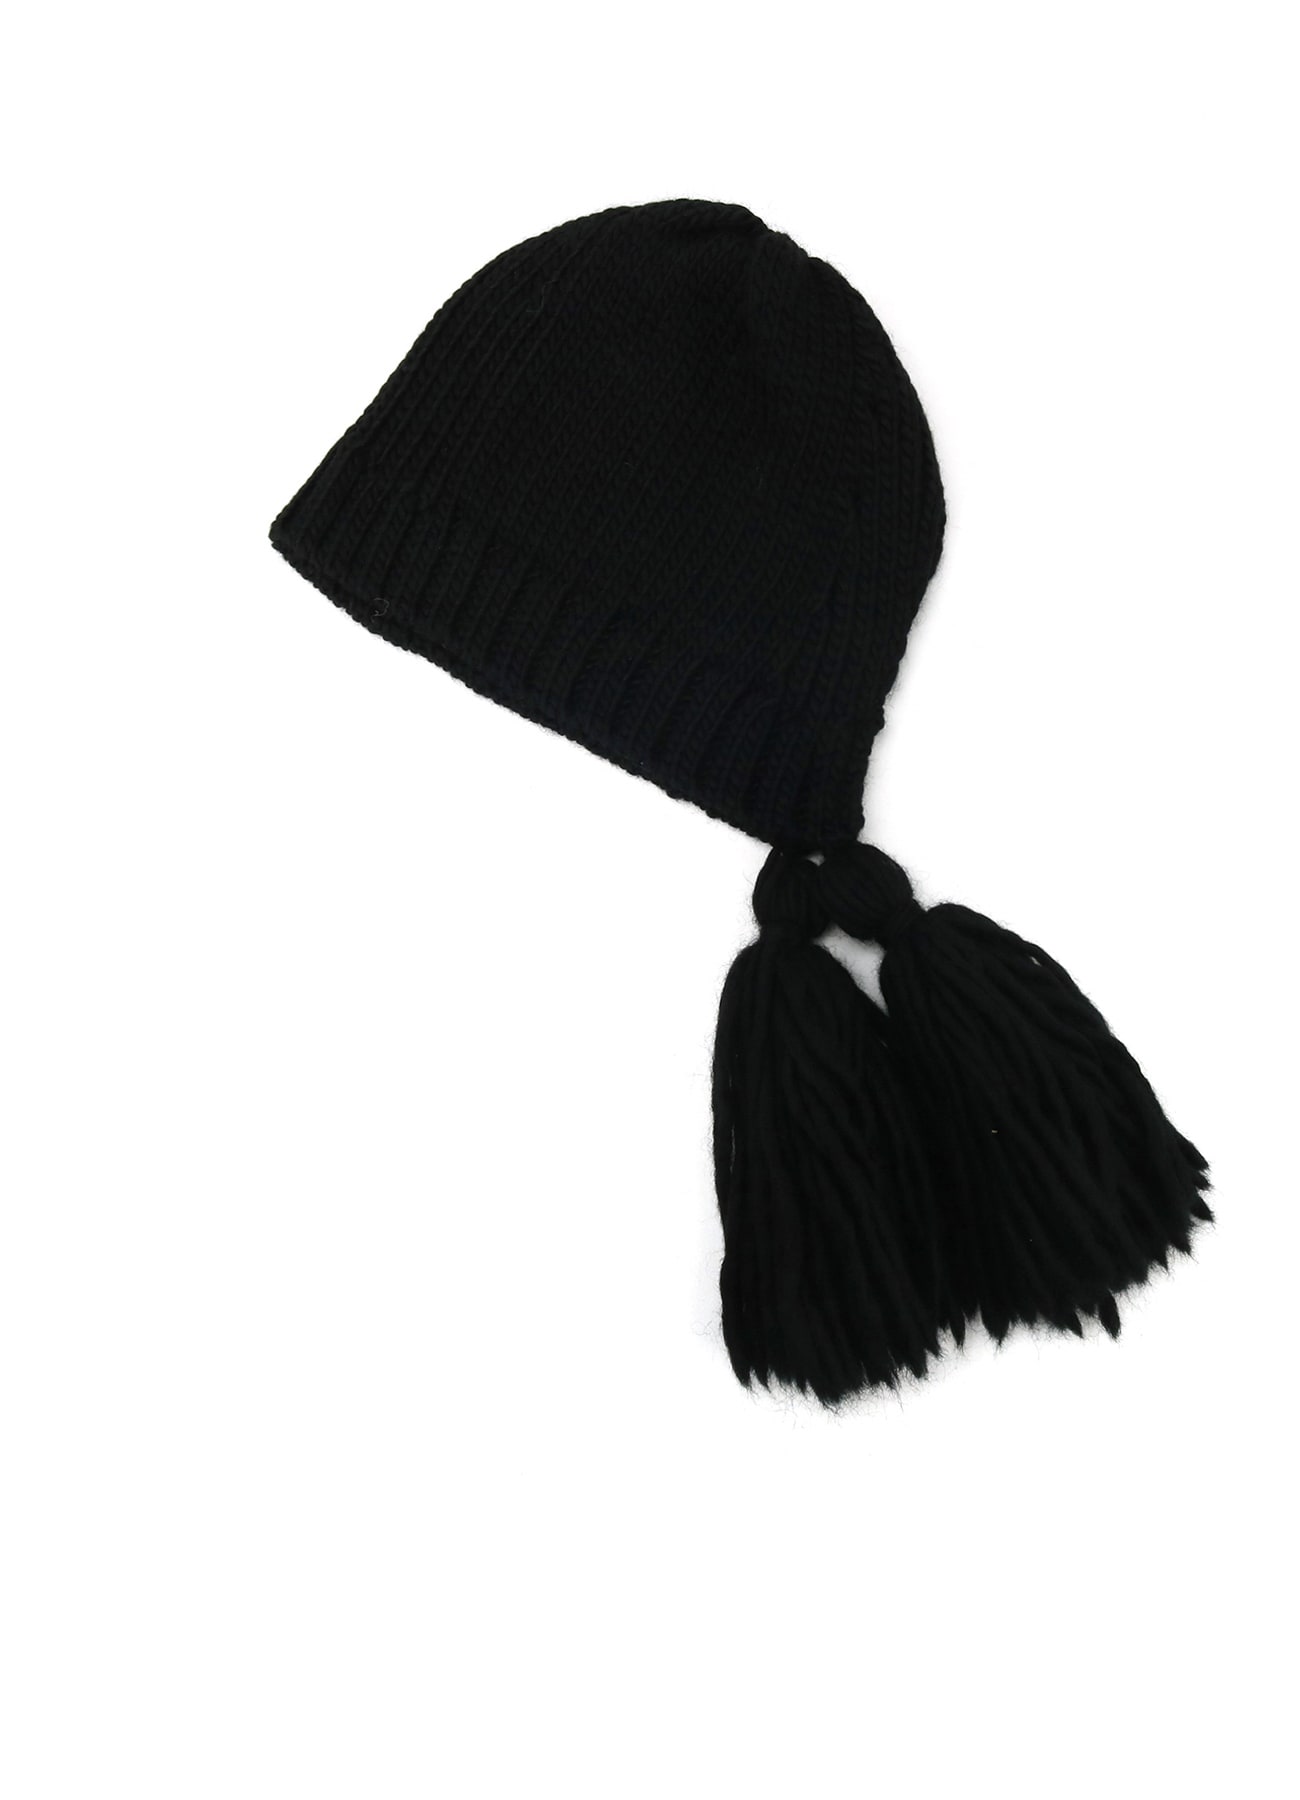 KNITTED WOOL JERSEY HAT WITH TASSELS